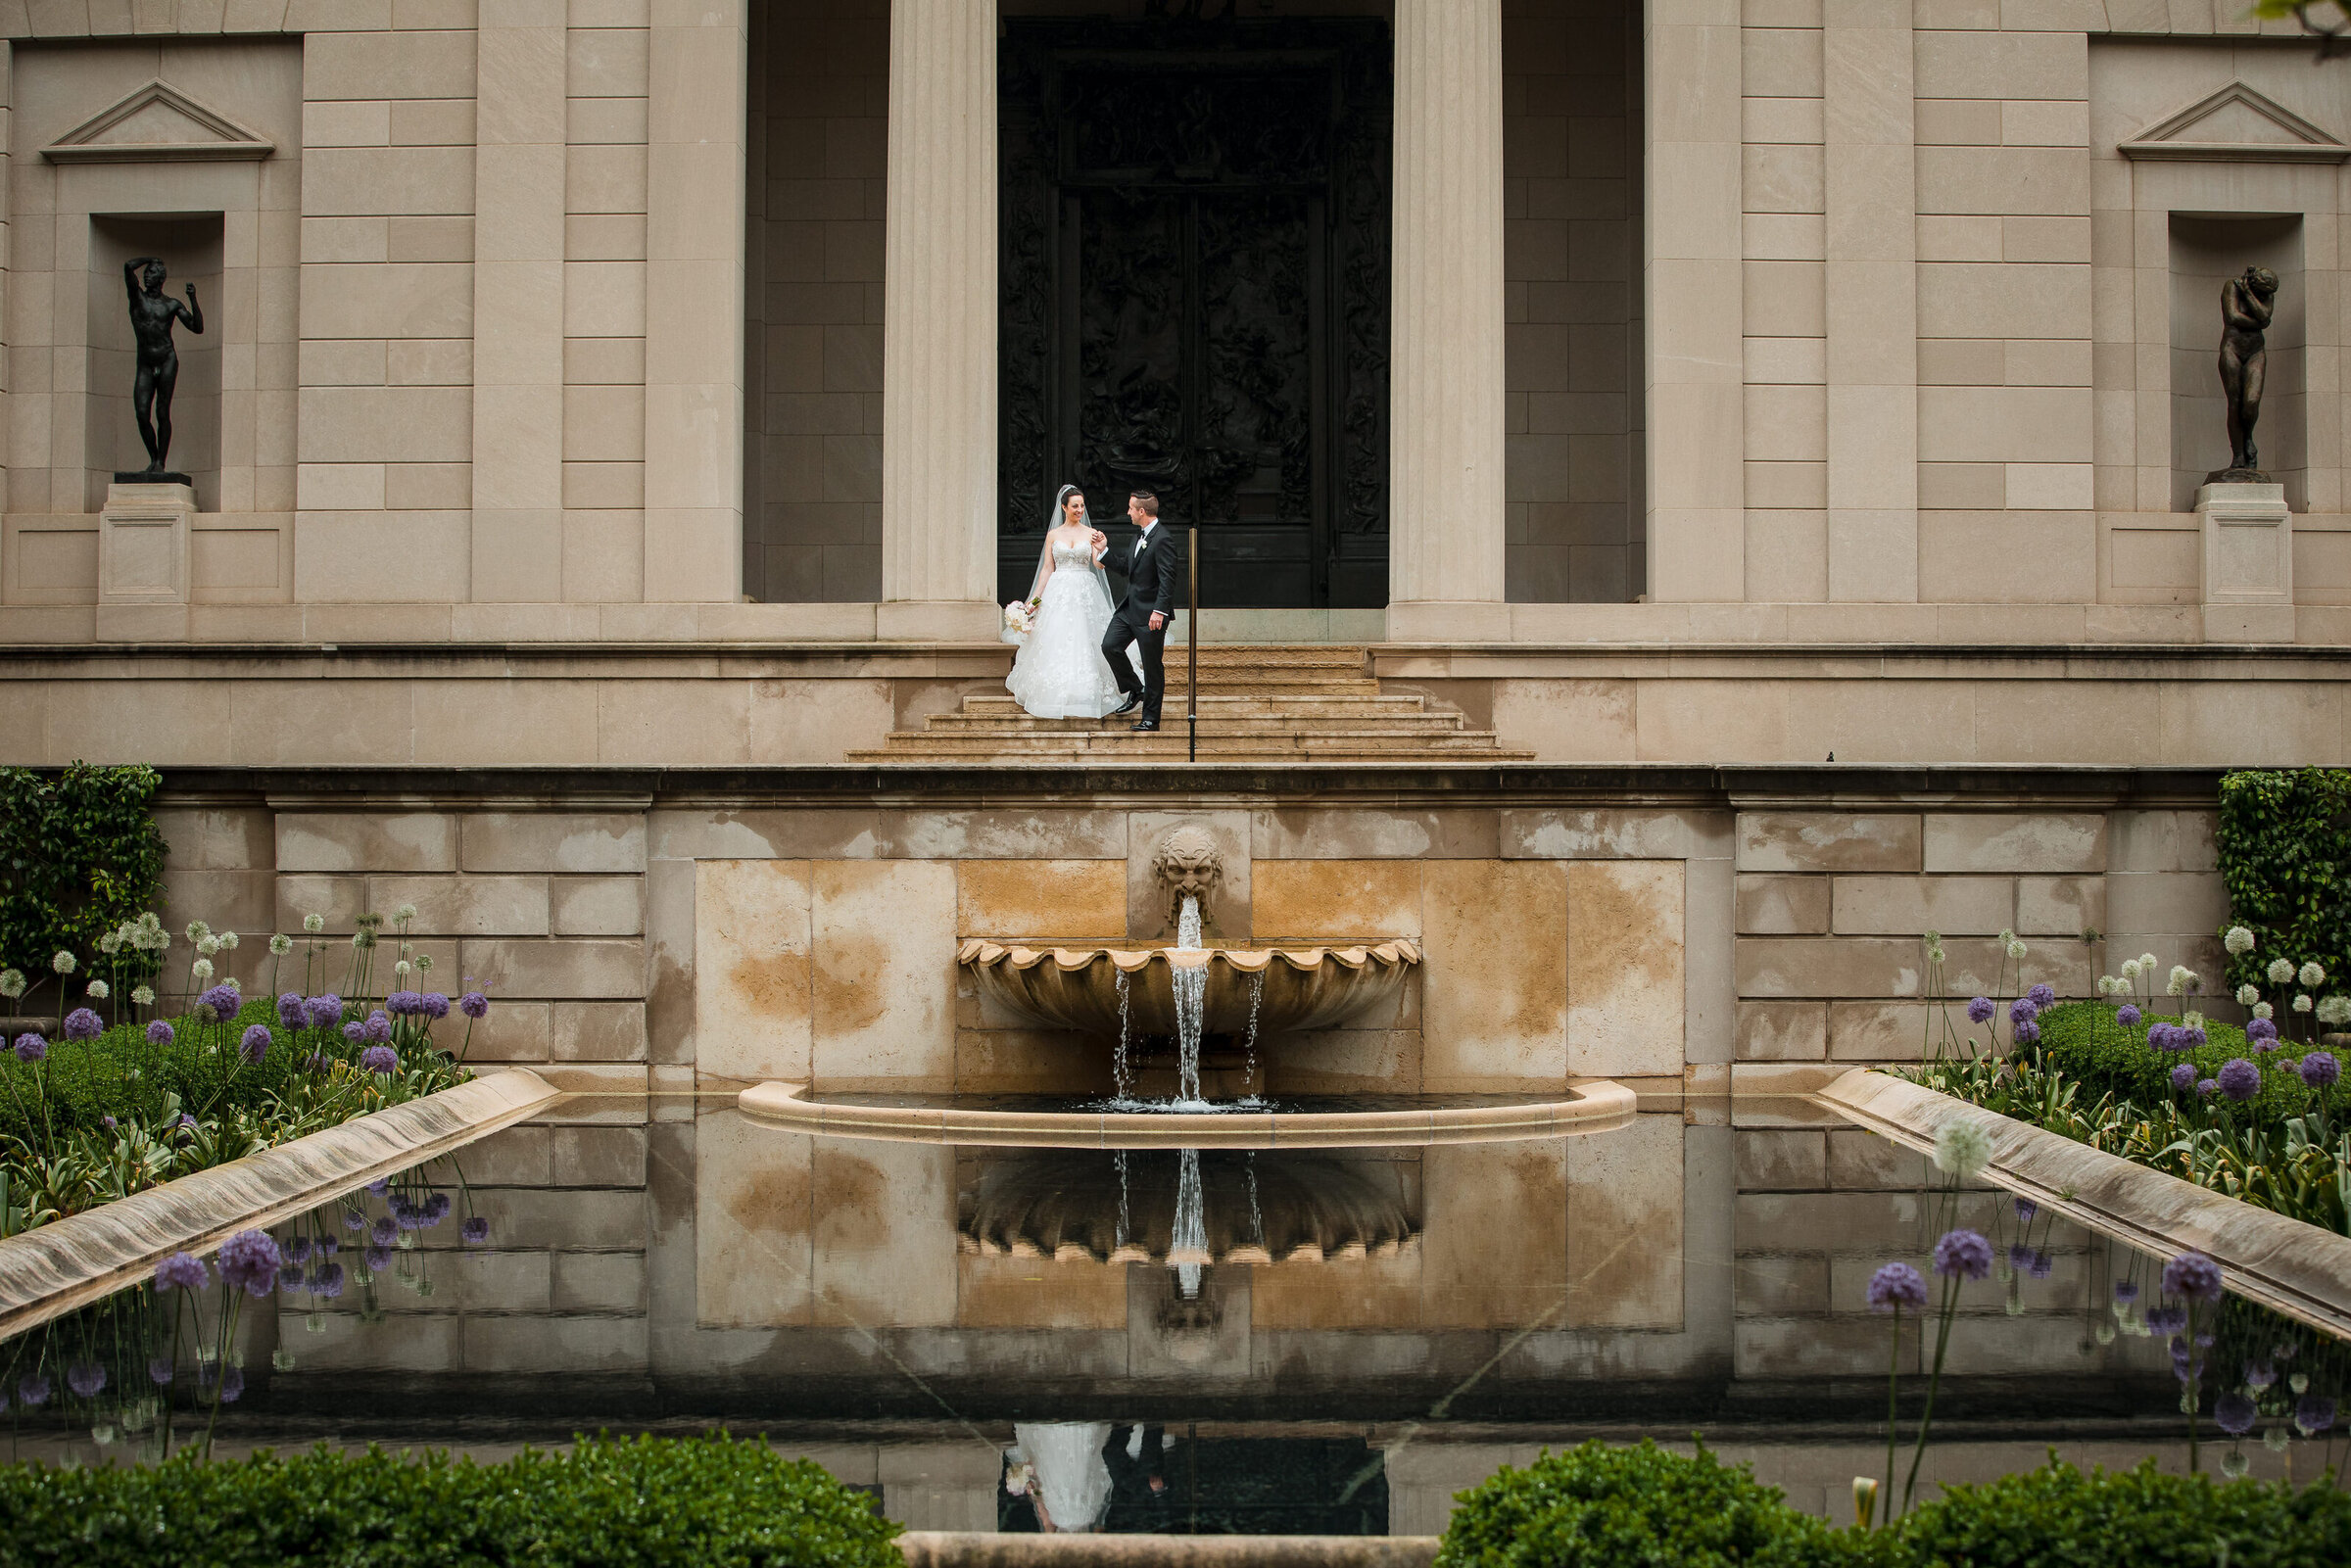 The groom is walking the bride down the steps at Rodin Museum wedding in Philadelphia.  Their reflection can be seen in the beautiful pool.